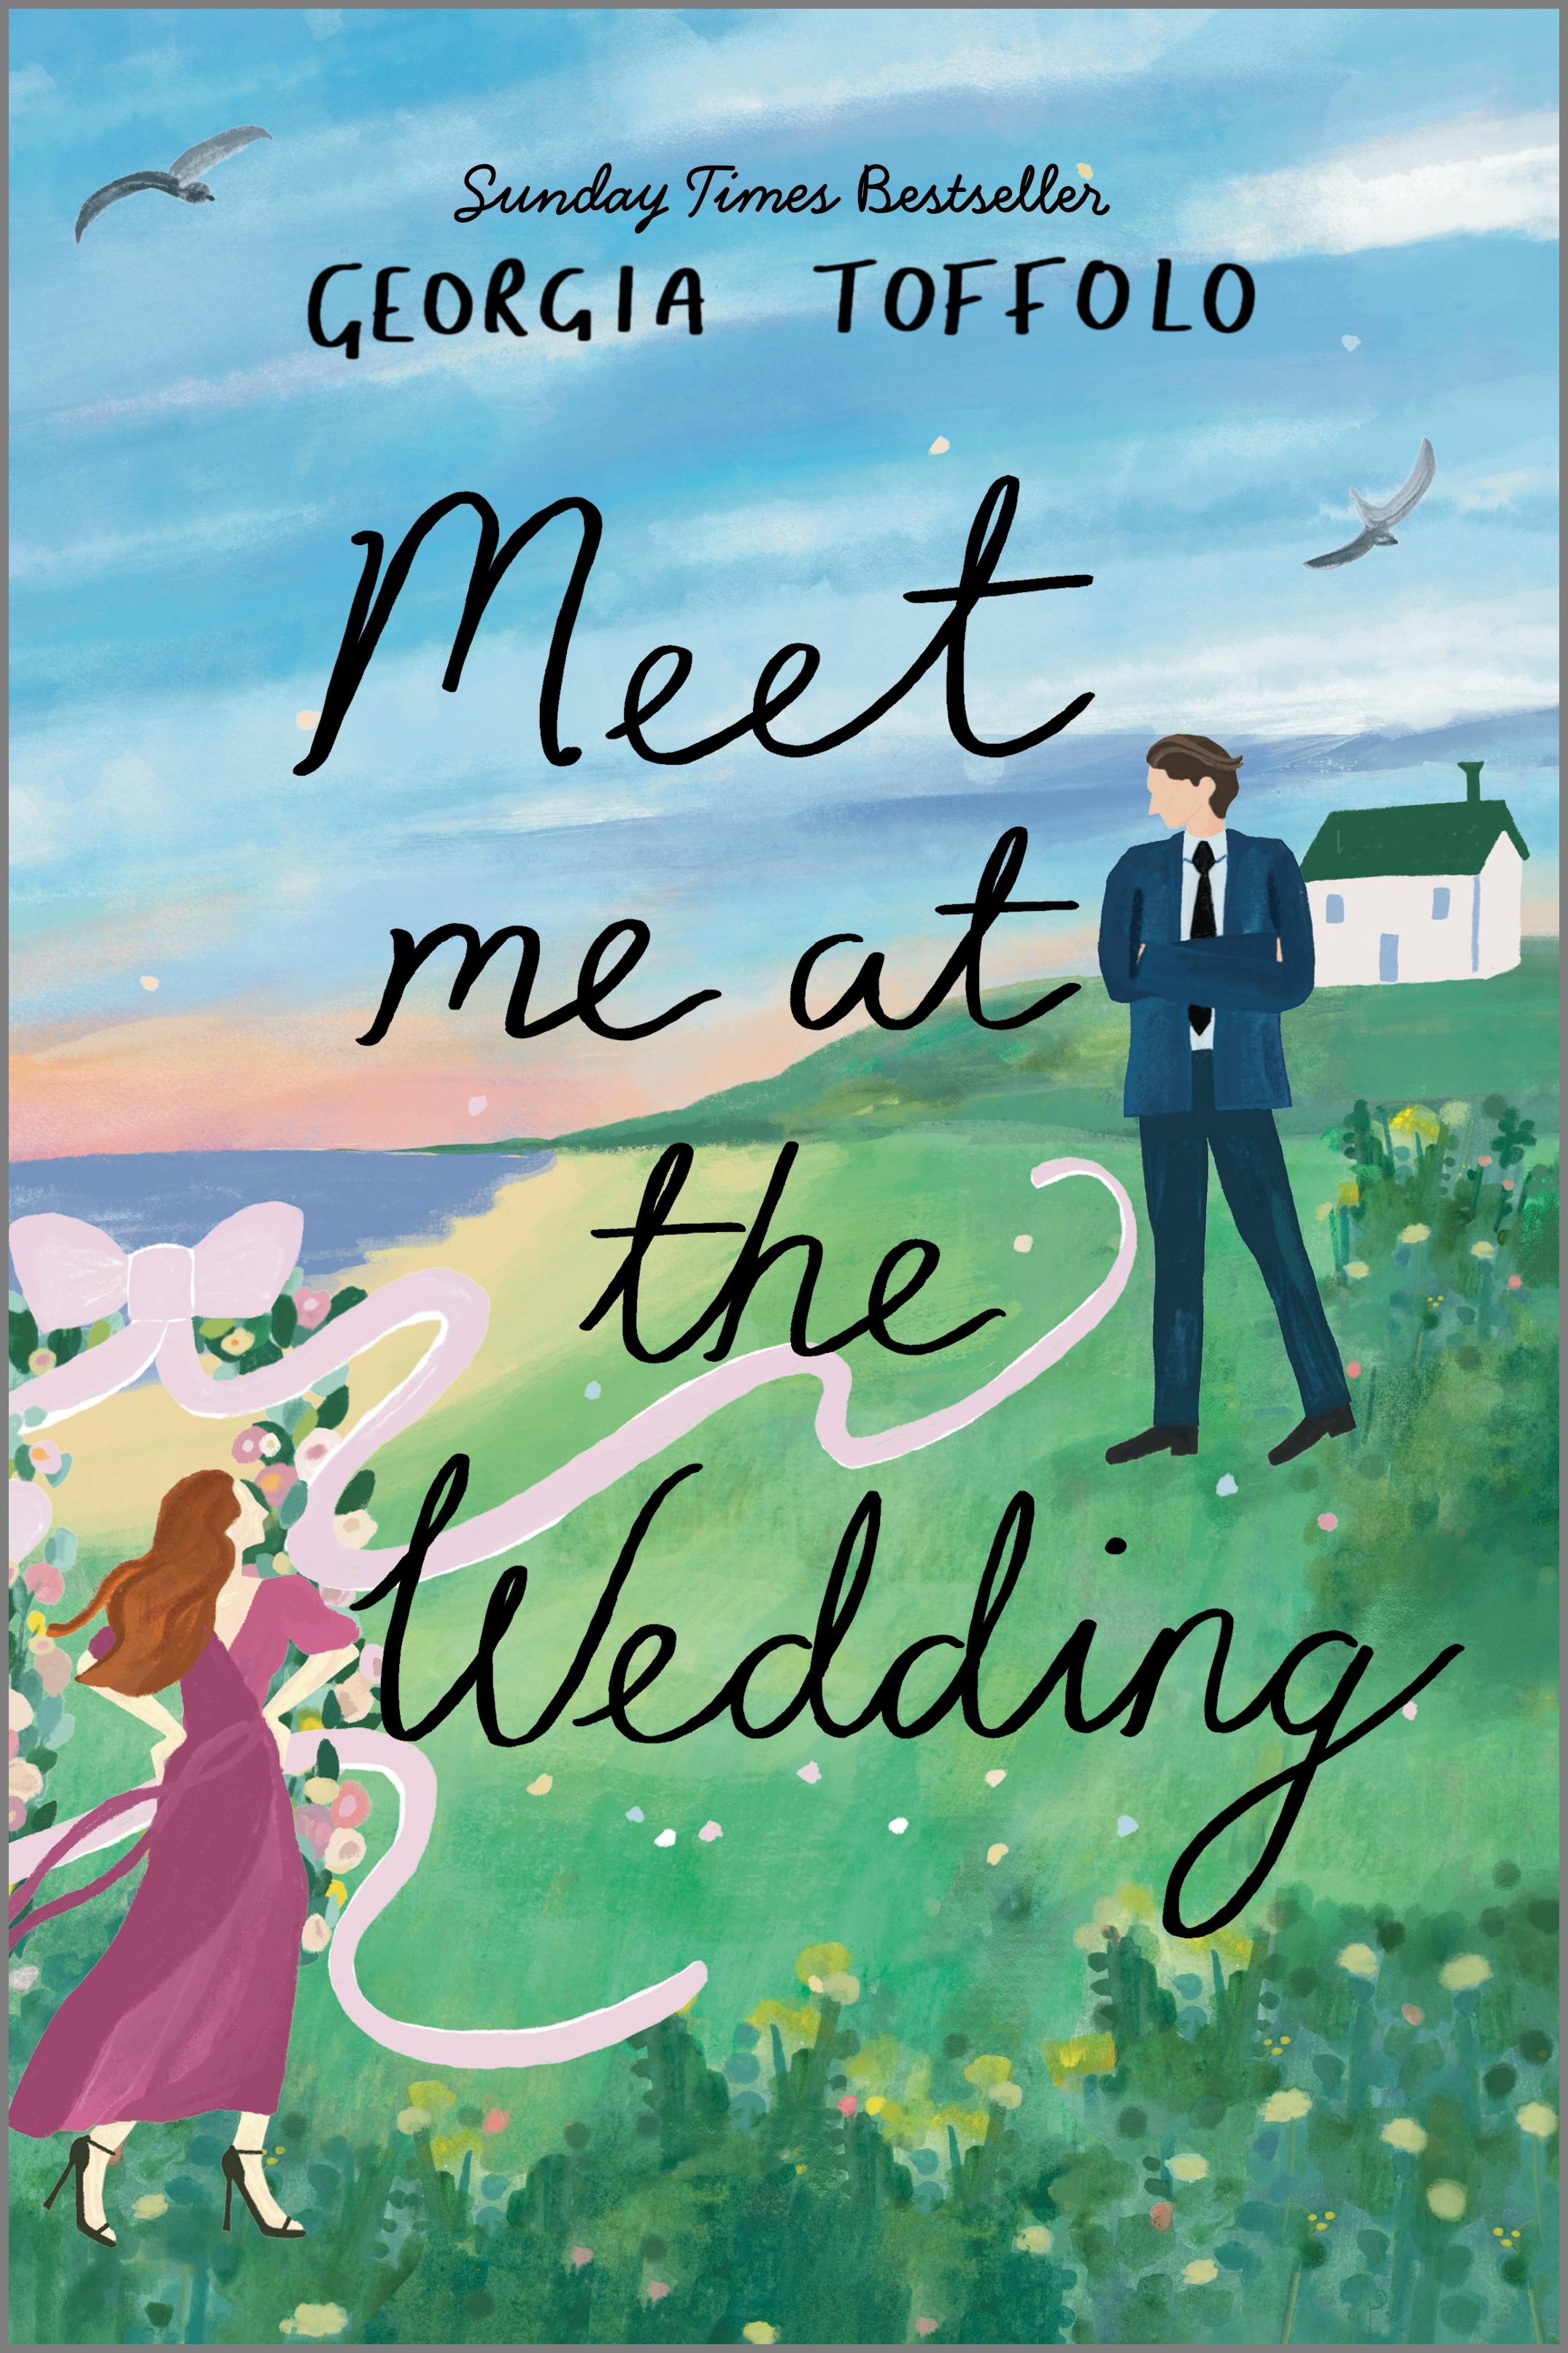 Cover image for MEET ME AT THE WEDDING by Georgia Toffolo, featuring an illustration of a man and a woman. The man is looking down at the woman from the top of a hill, while the woman is looking up at him.